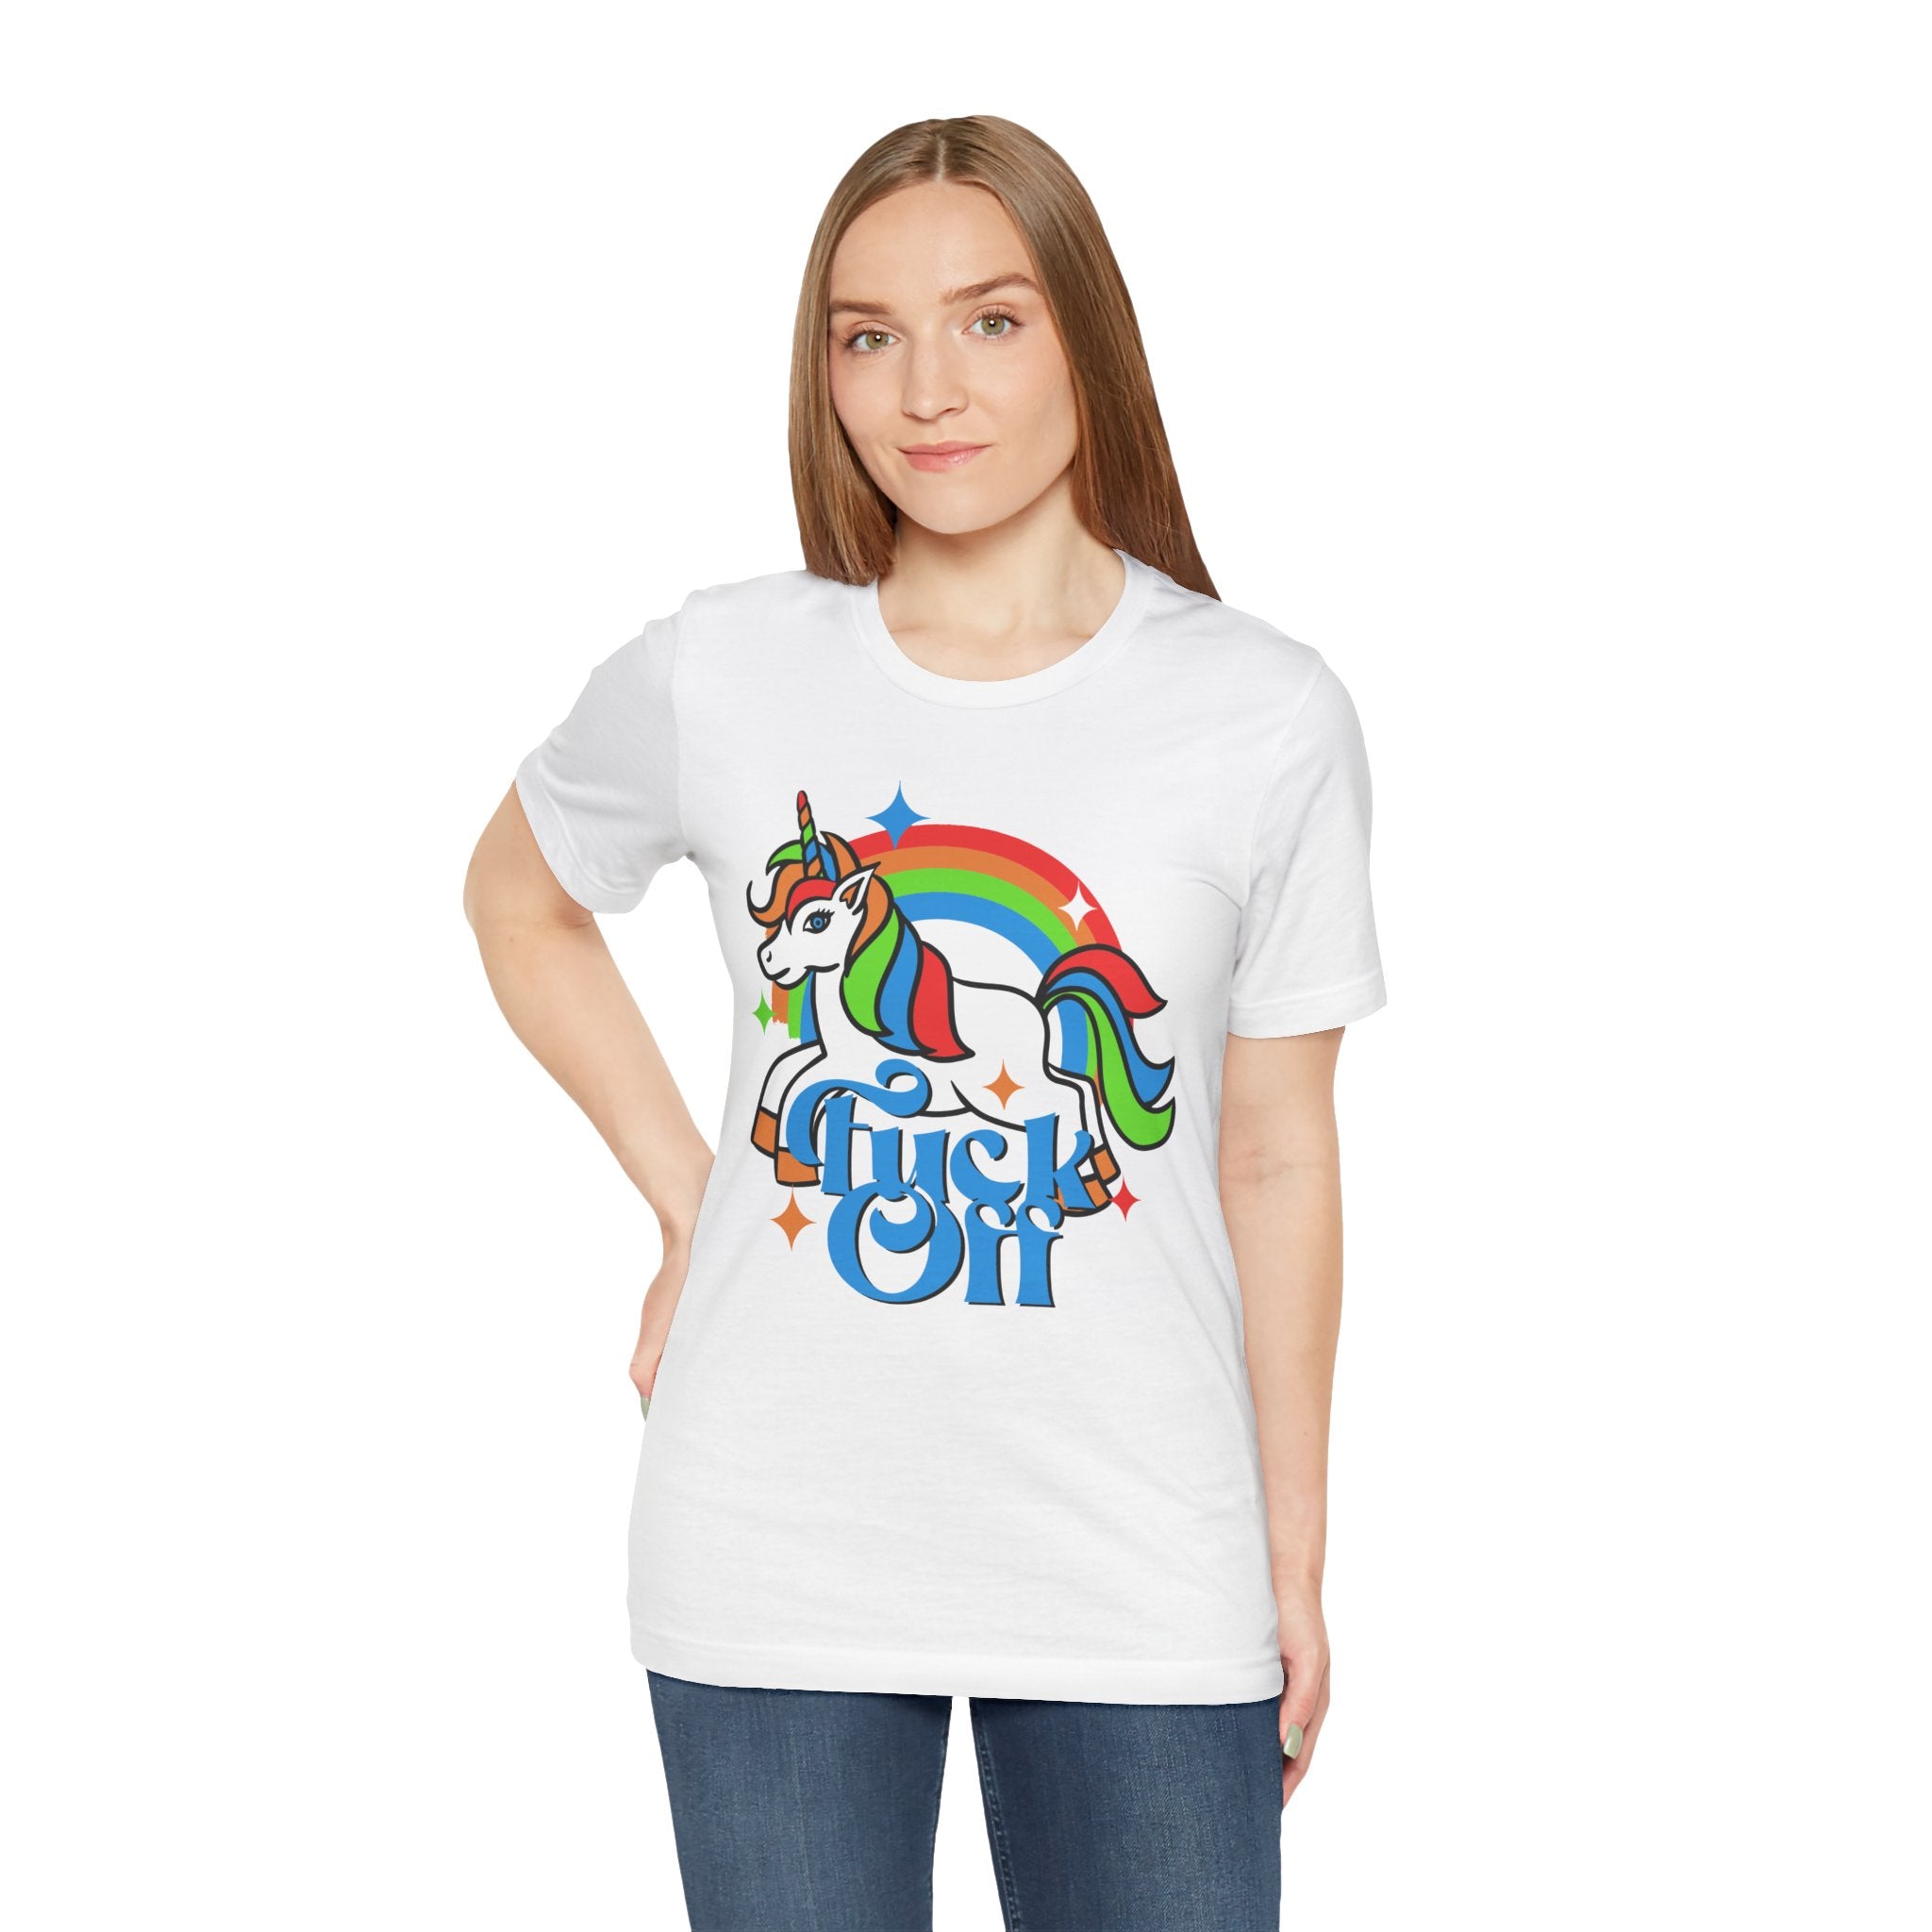 Woman wearing a white F off T-shirt with a colorful unicorn and a rainbow design that reads "chill out.